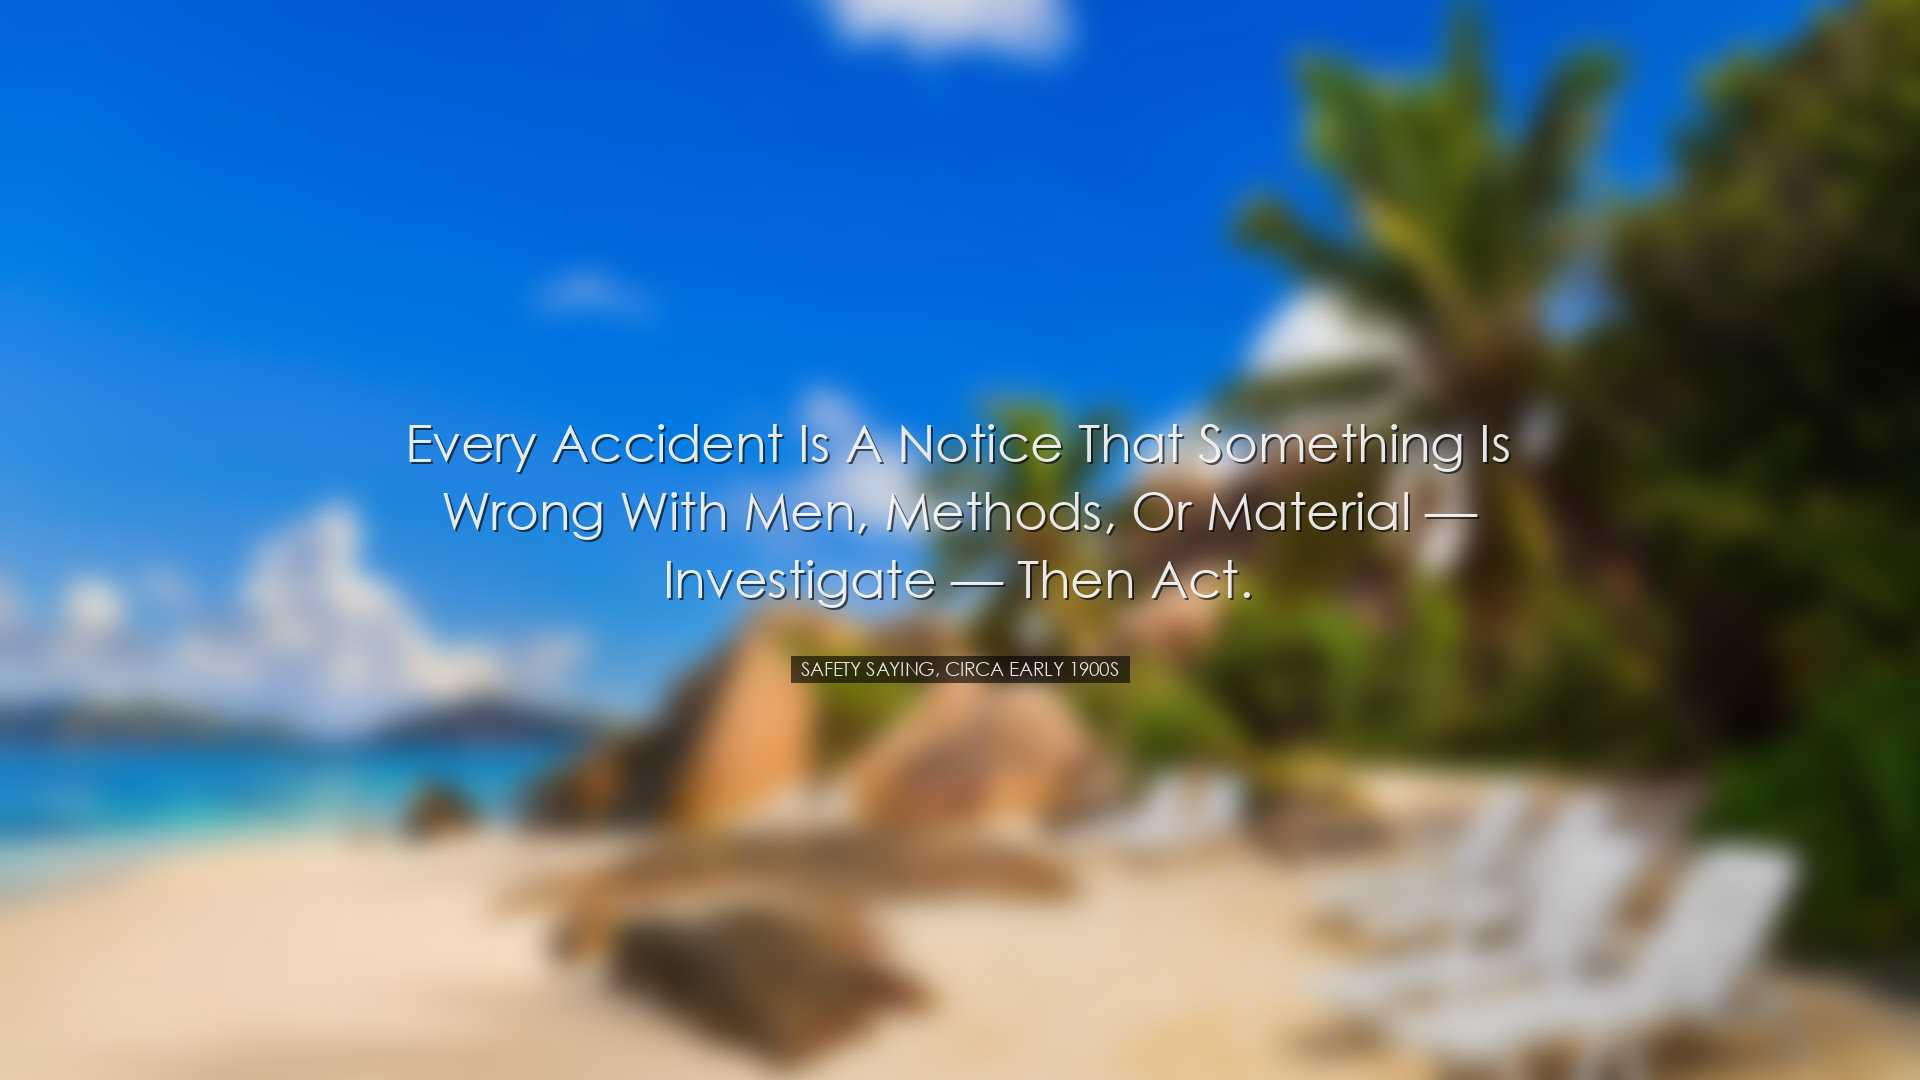 Every accident is a notice that something is wrong with men, metho